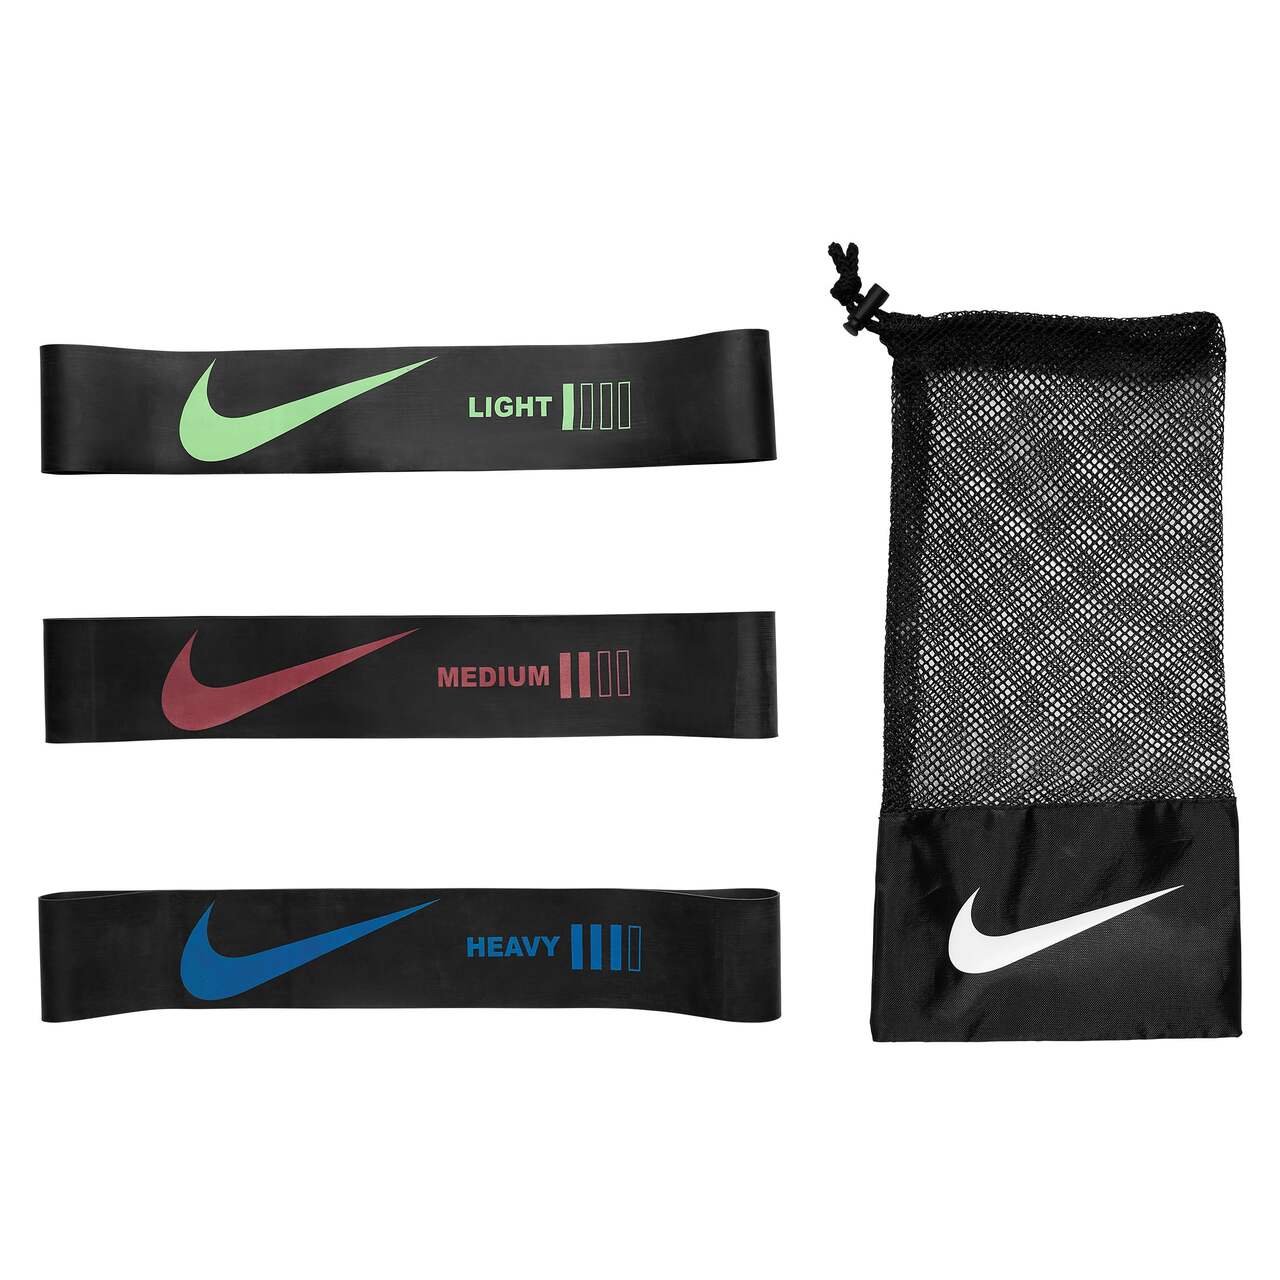 https://media-www.canadiantire.ca/product/playing/exercise/exercise-accessories/1841090/nike-resistance-bands-3-pack-black-18573ef8-9f9a-4fc2-9dd1-579d0de9d469-jpgrendition.jpg?imdensity=1&imwidth=640&impolicy=mZoom